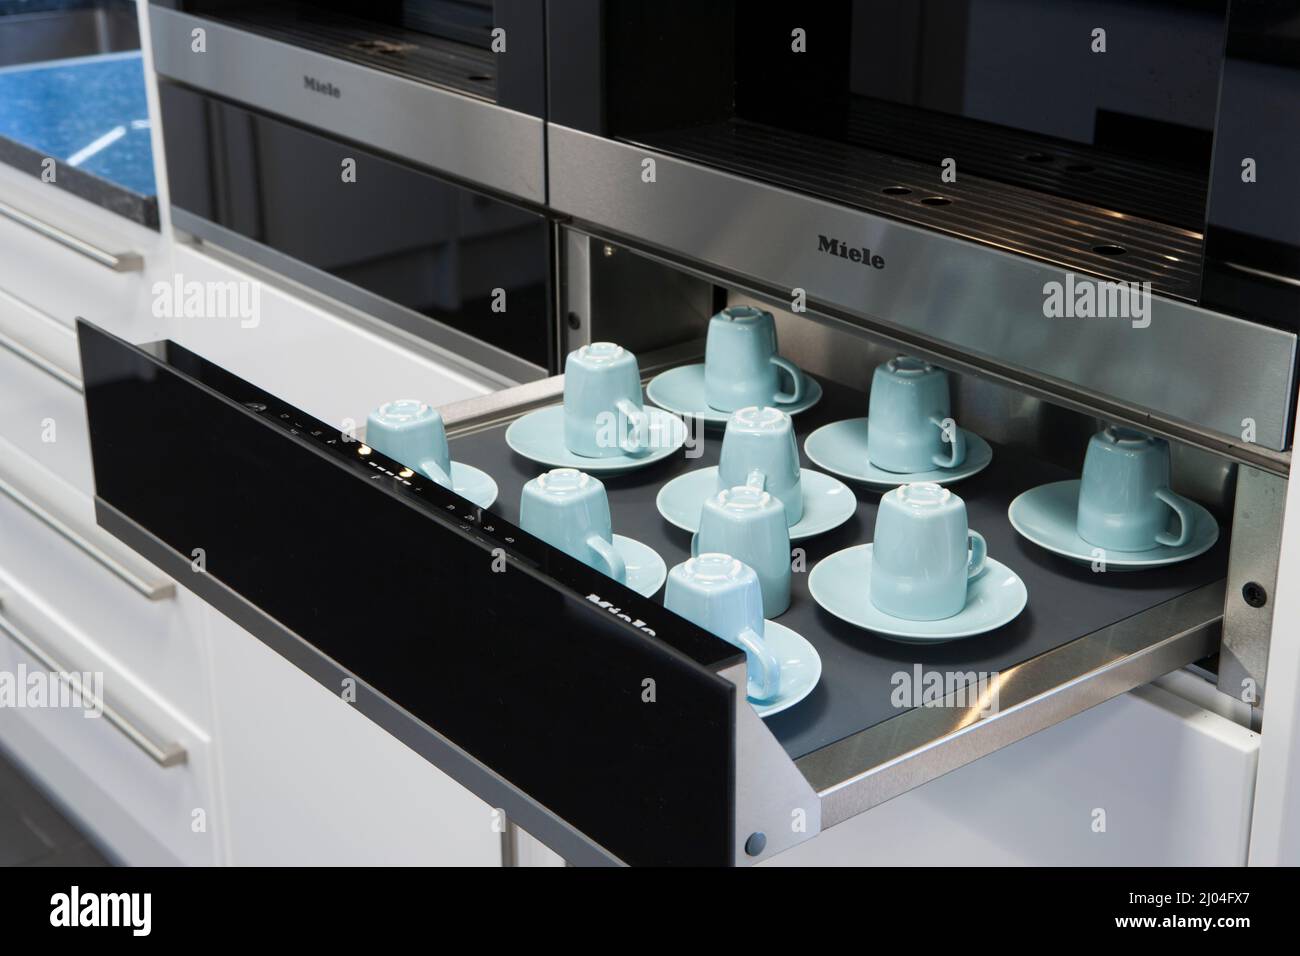 Office Interior. Dishwasher and cups Stock Photo